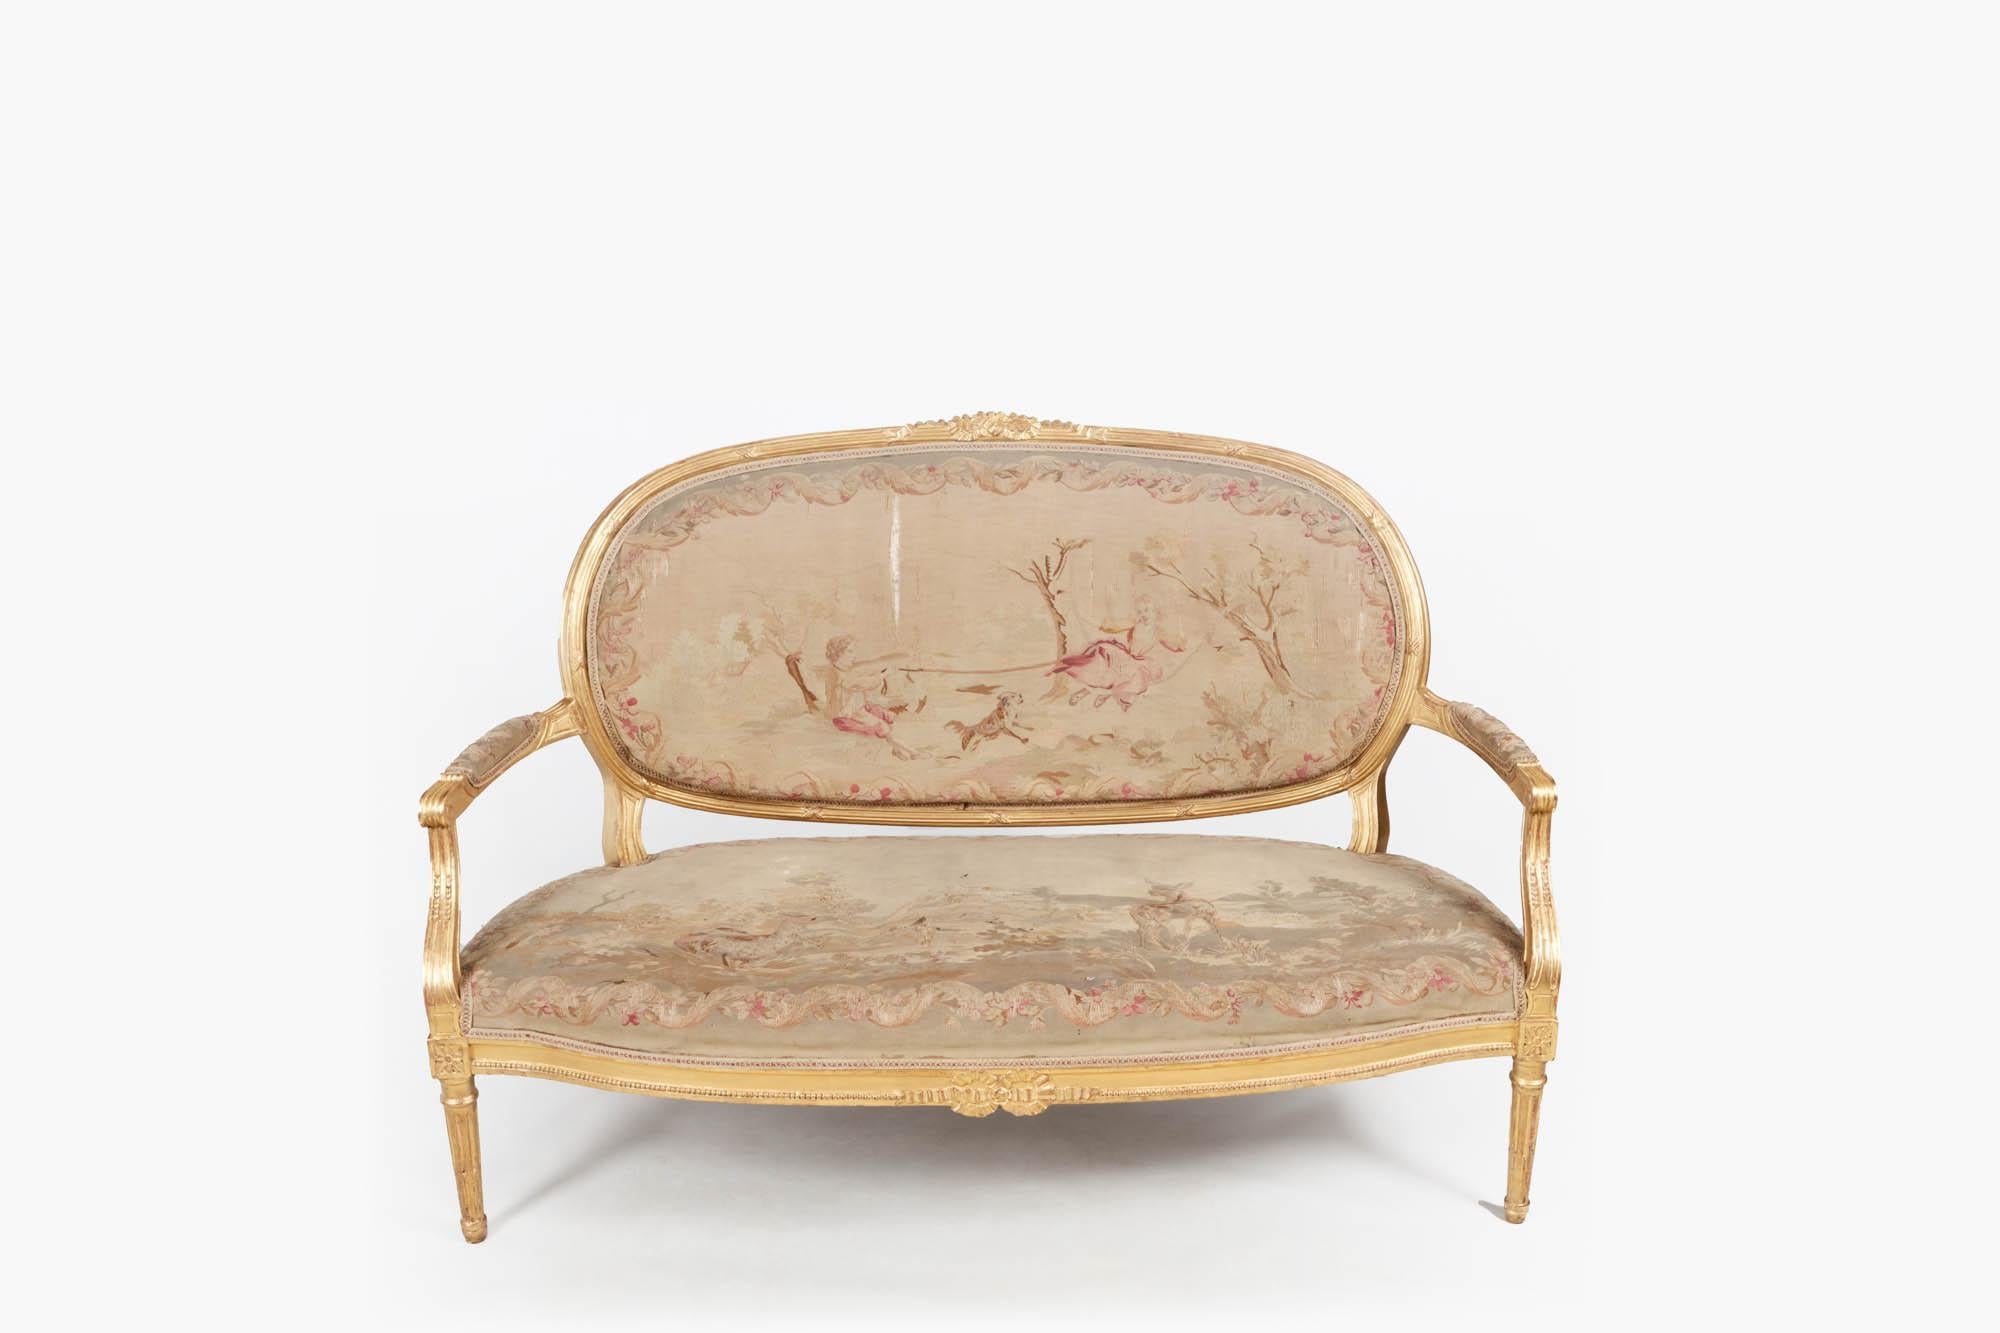 19th century Louis XVI style carved five piece gilt salon suite consisting of canapé sofa and four fauteuil chairs all complete with tapestry upholstery.

The sofa with giltwood frame has an oval ribbon carved back, and shaped padded armrests